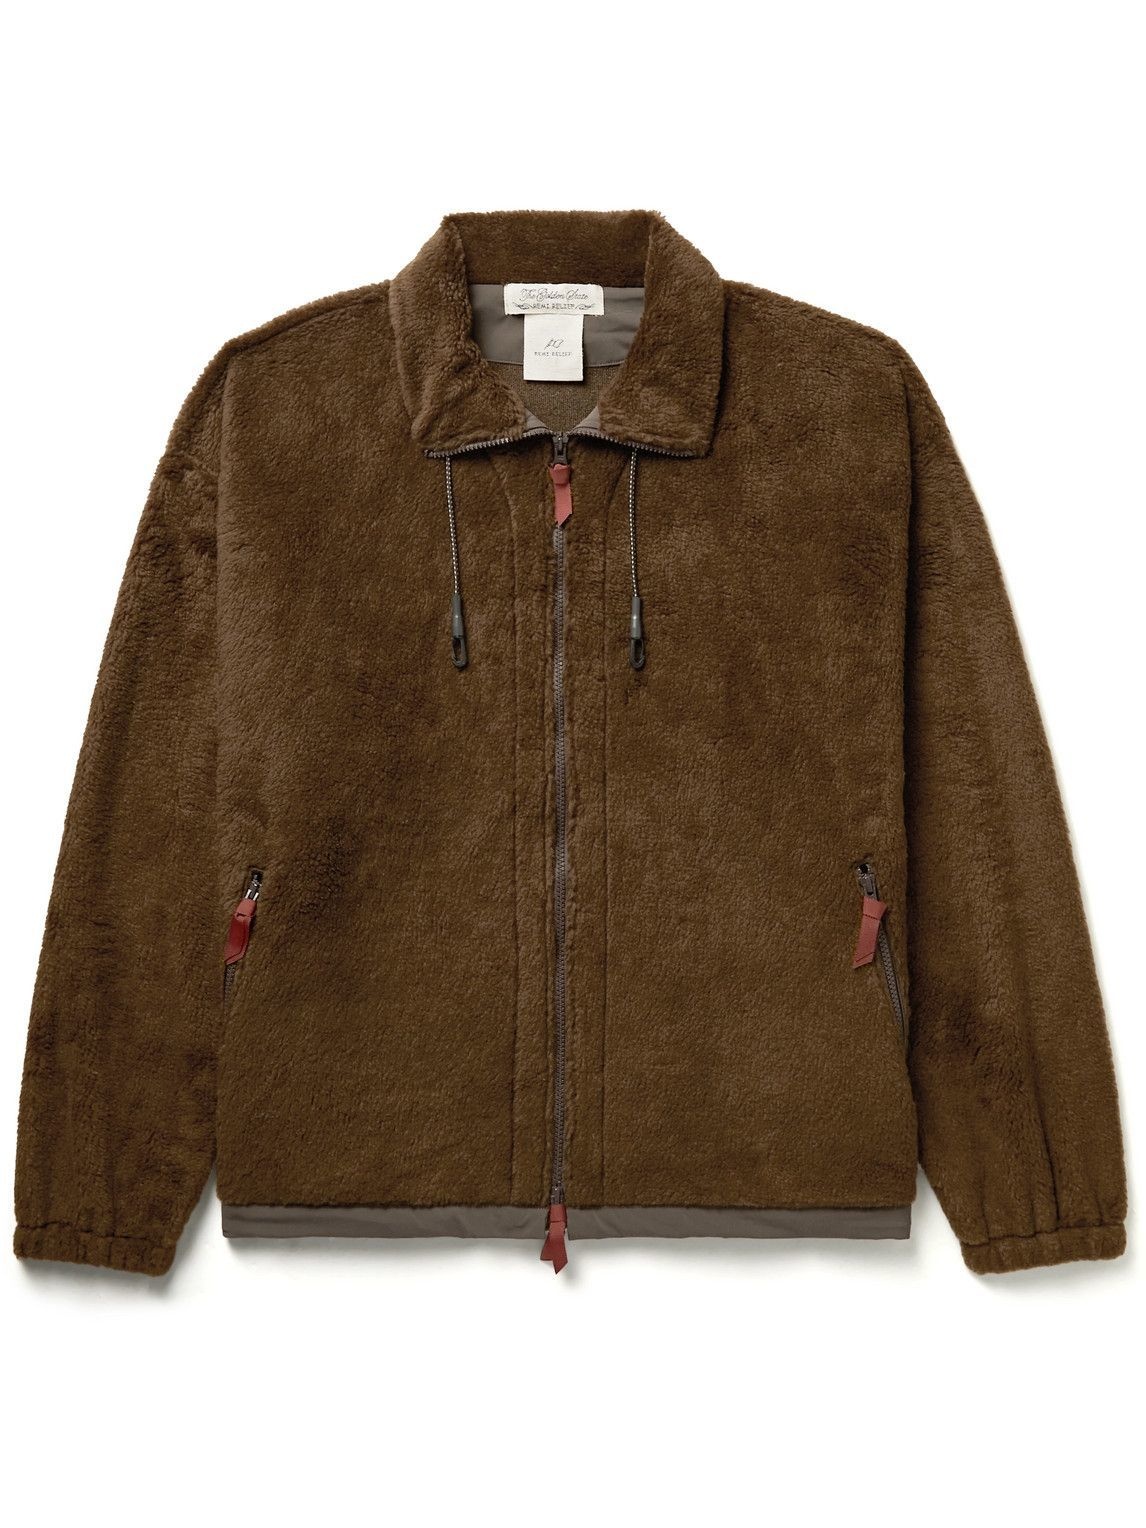 Remi Relief - Shell-Trimmed Fleece Jacket - Brown Remi Relief